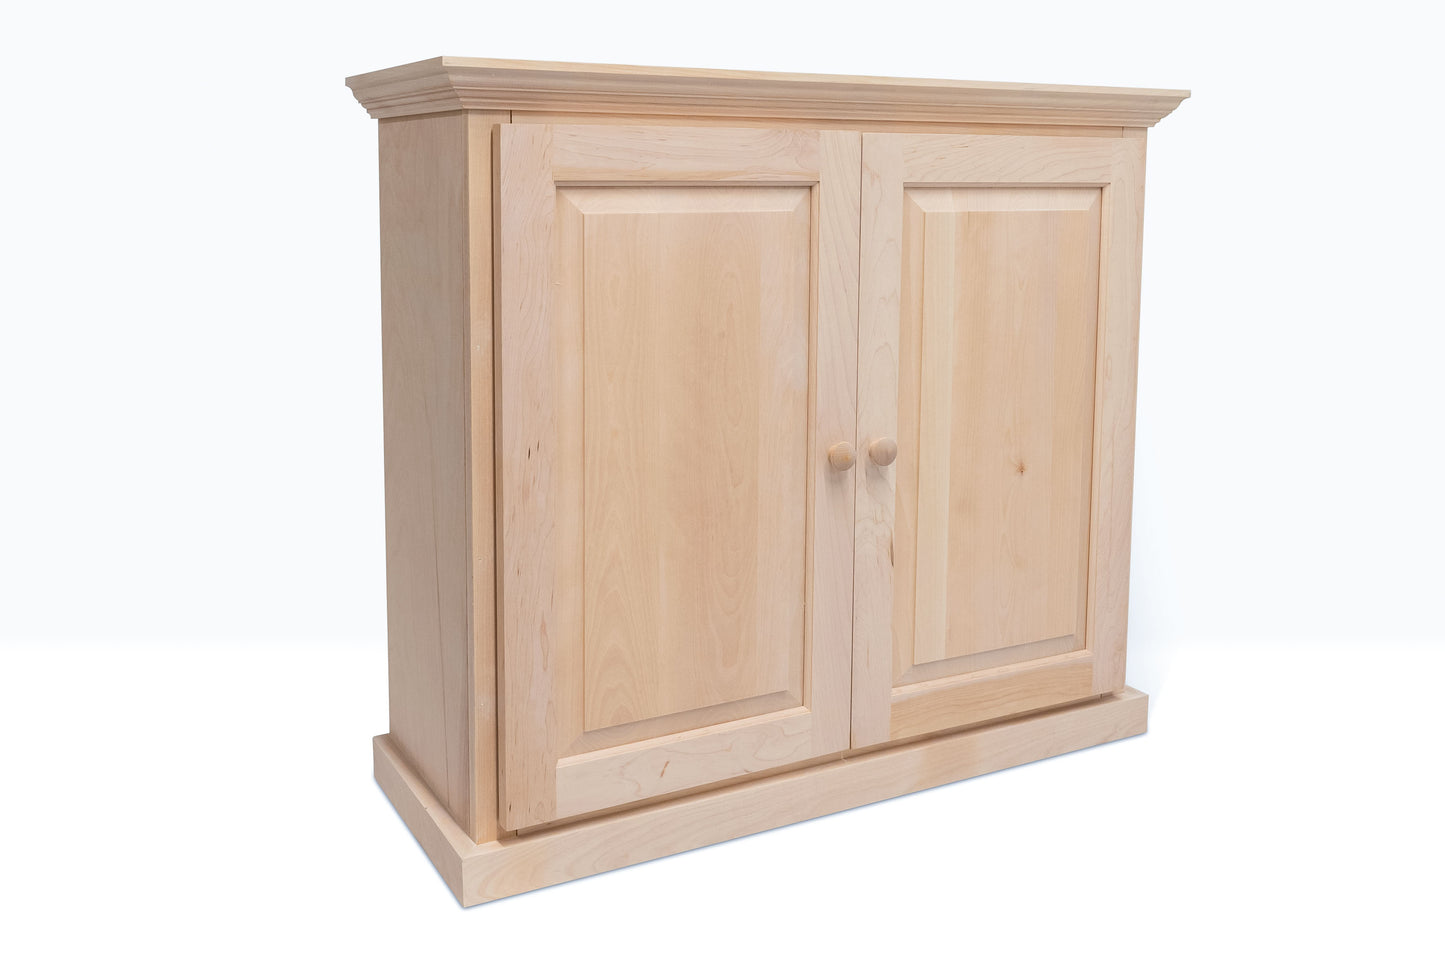 Berkshire Dover Cabinet is made from birch and is shown unfinished.